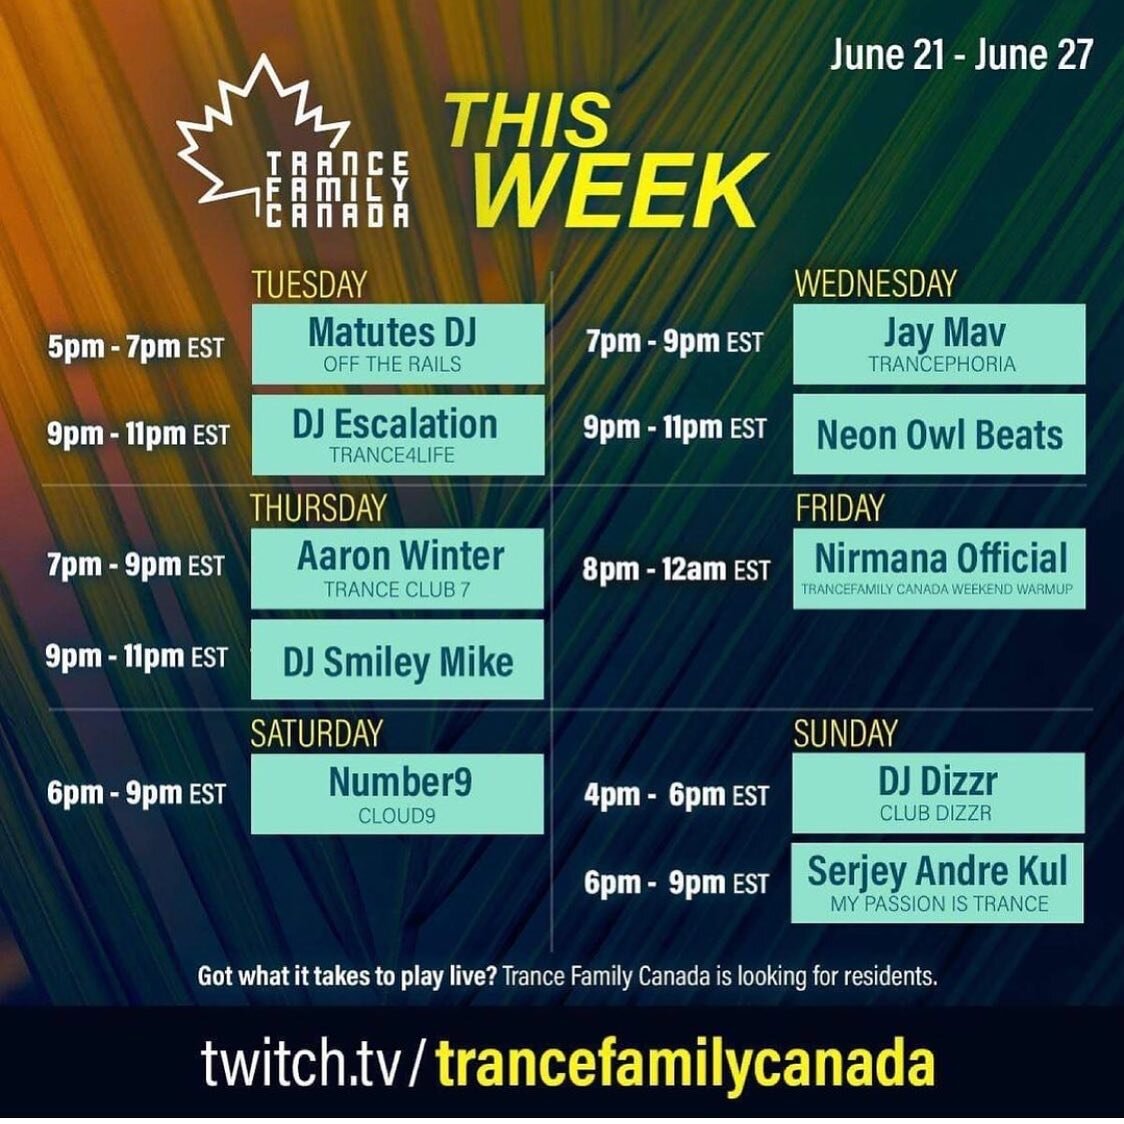 So excited for my debut on @trancefamcan tonight!! 🇨🇦🍁🎶🙌🏼 hope you see you there! We launch at 6pm PDT! 🚀
.
.
www.twitch.tv/TranceFamilyCanada
.
.
#trance #trancebutter #djescalation #trance4life #trancefamily #trancefamilysd #trancefamilyla #